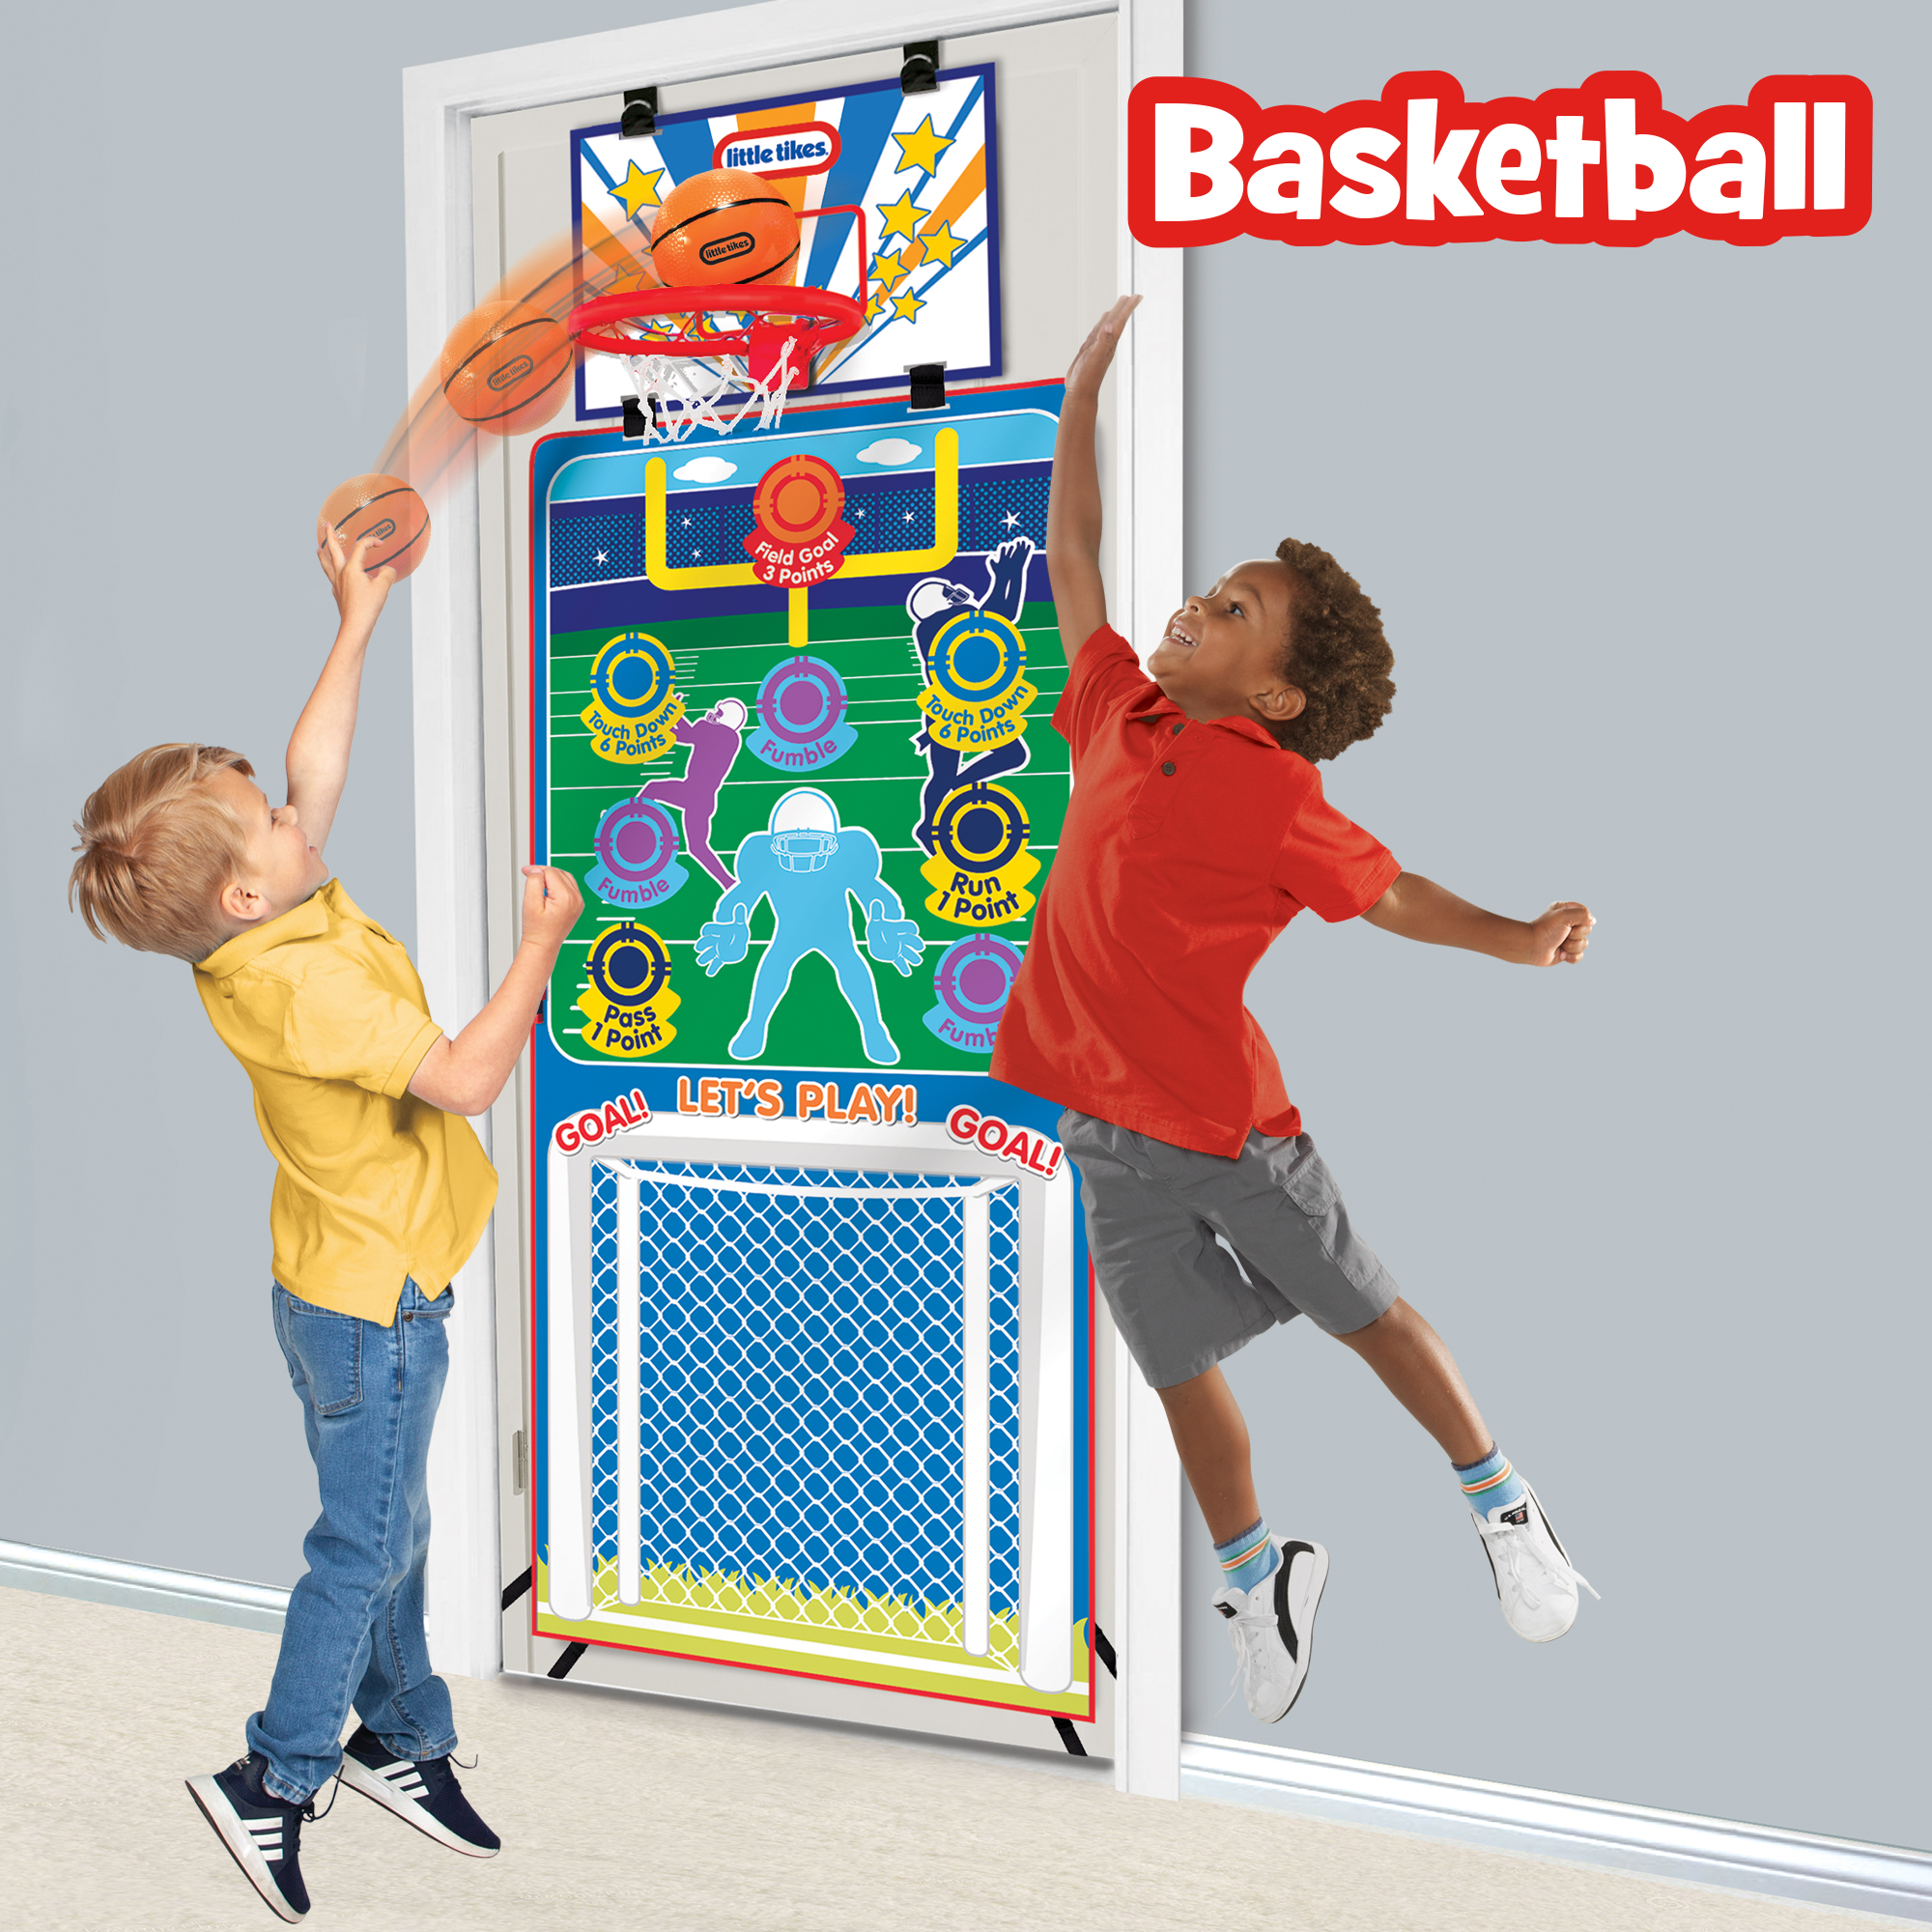 Little Tikes 3-in-1 Doorway Sports Center - Basketball, Football, Soccer for Kids 3+ - image 2 of 5